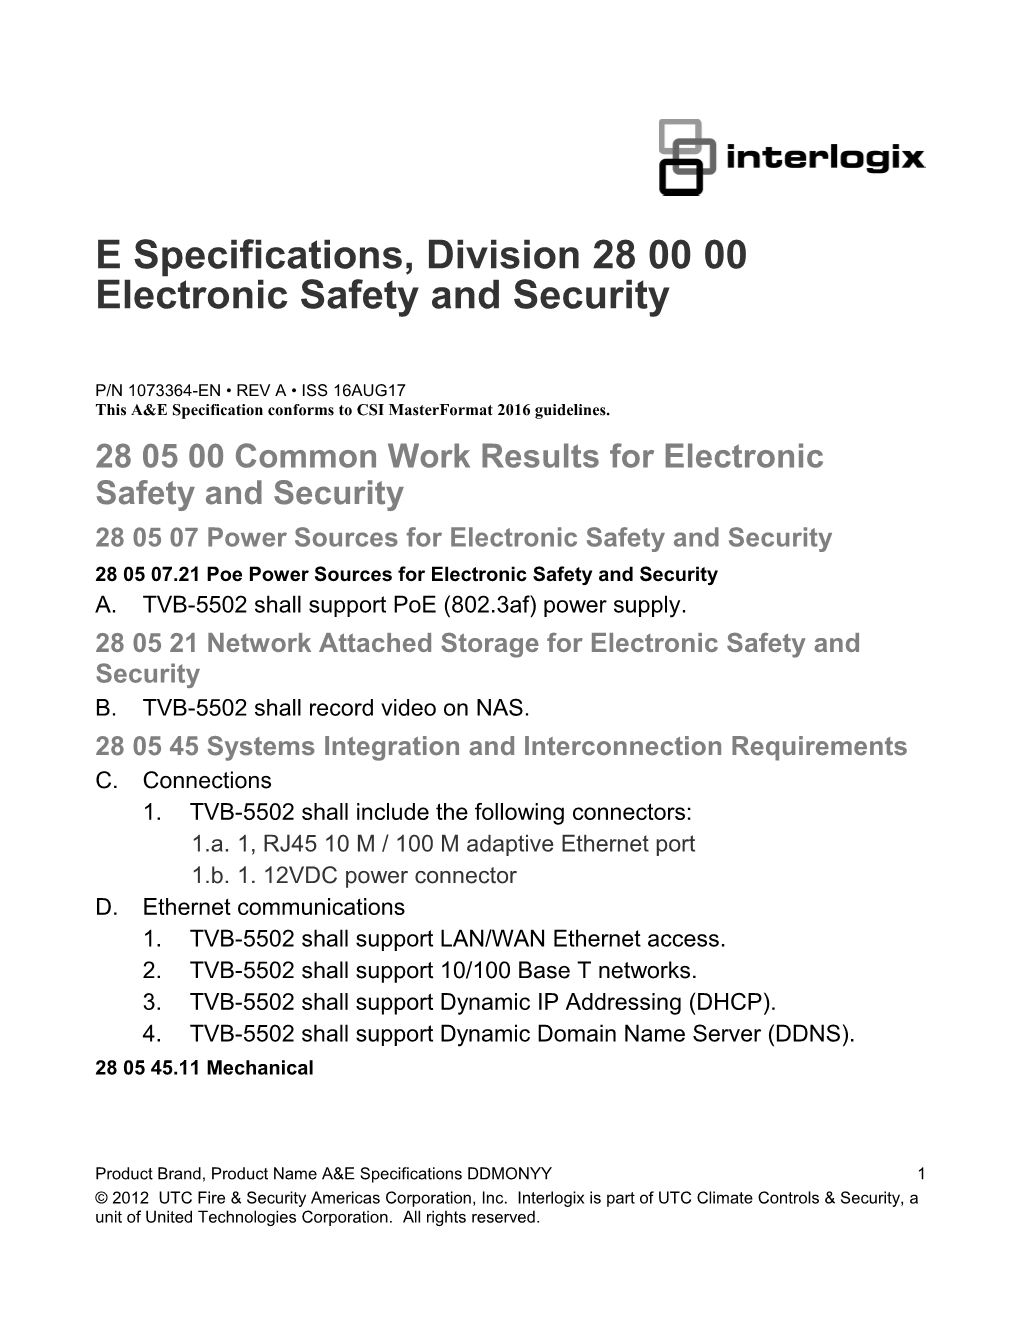 TVB-5502 IP S5 Camera A&E Specifications, Division 28 00 00 Electronic Safety and Security